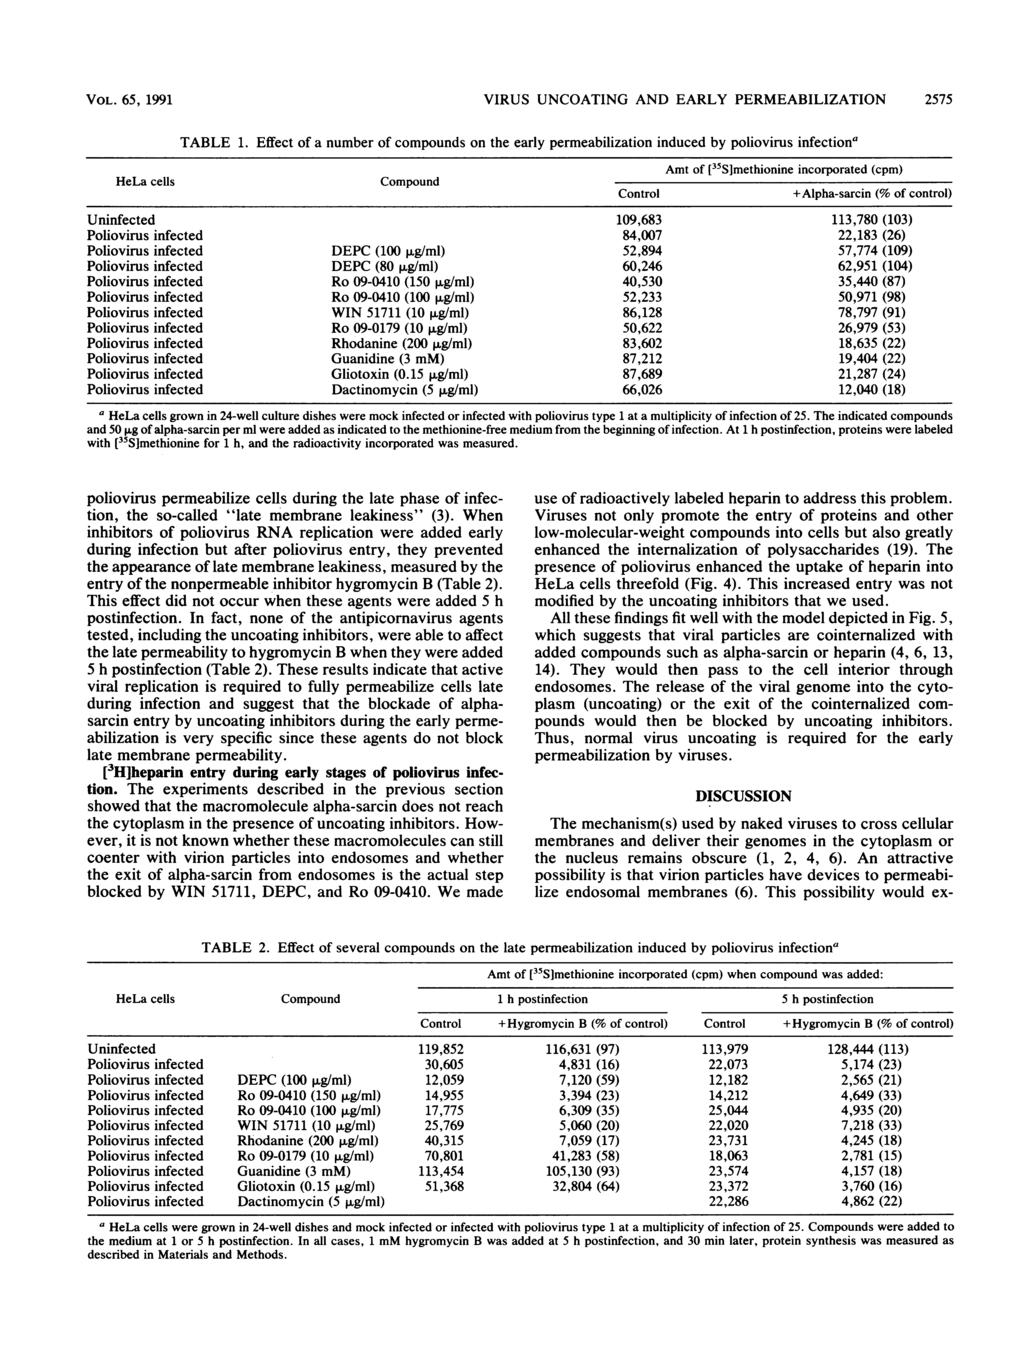 VOL. 65, 1991 VIRUS UNCOATING AND ARLY PRMABILIZATION 2575 HeLa cells TABL 1.